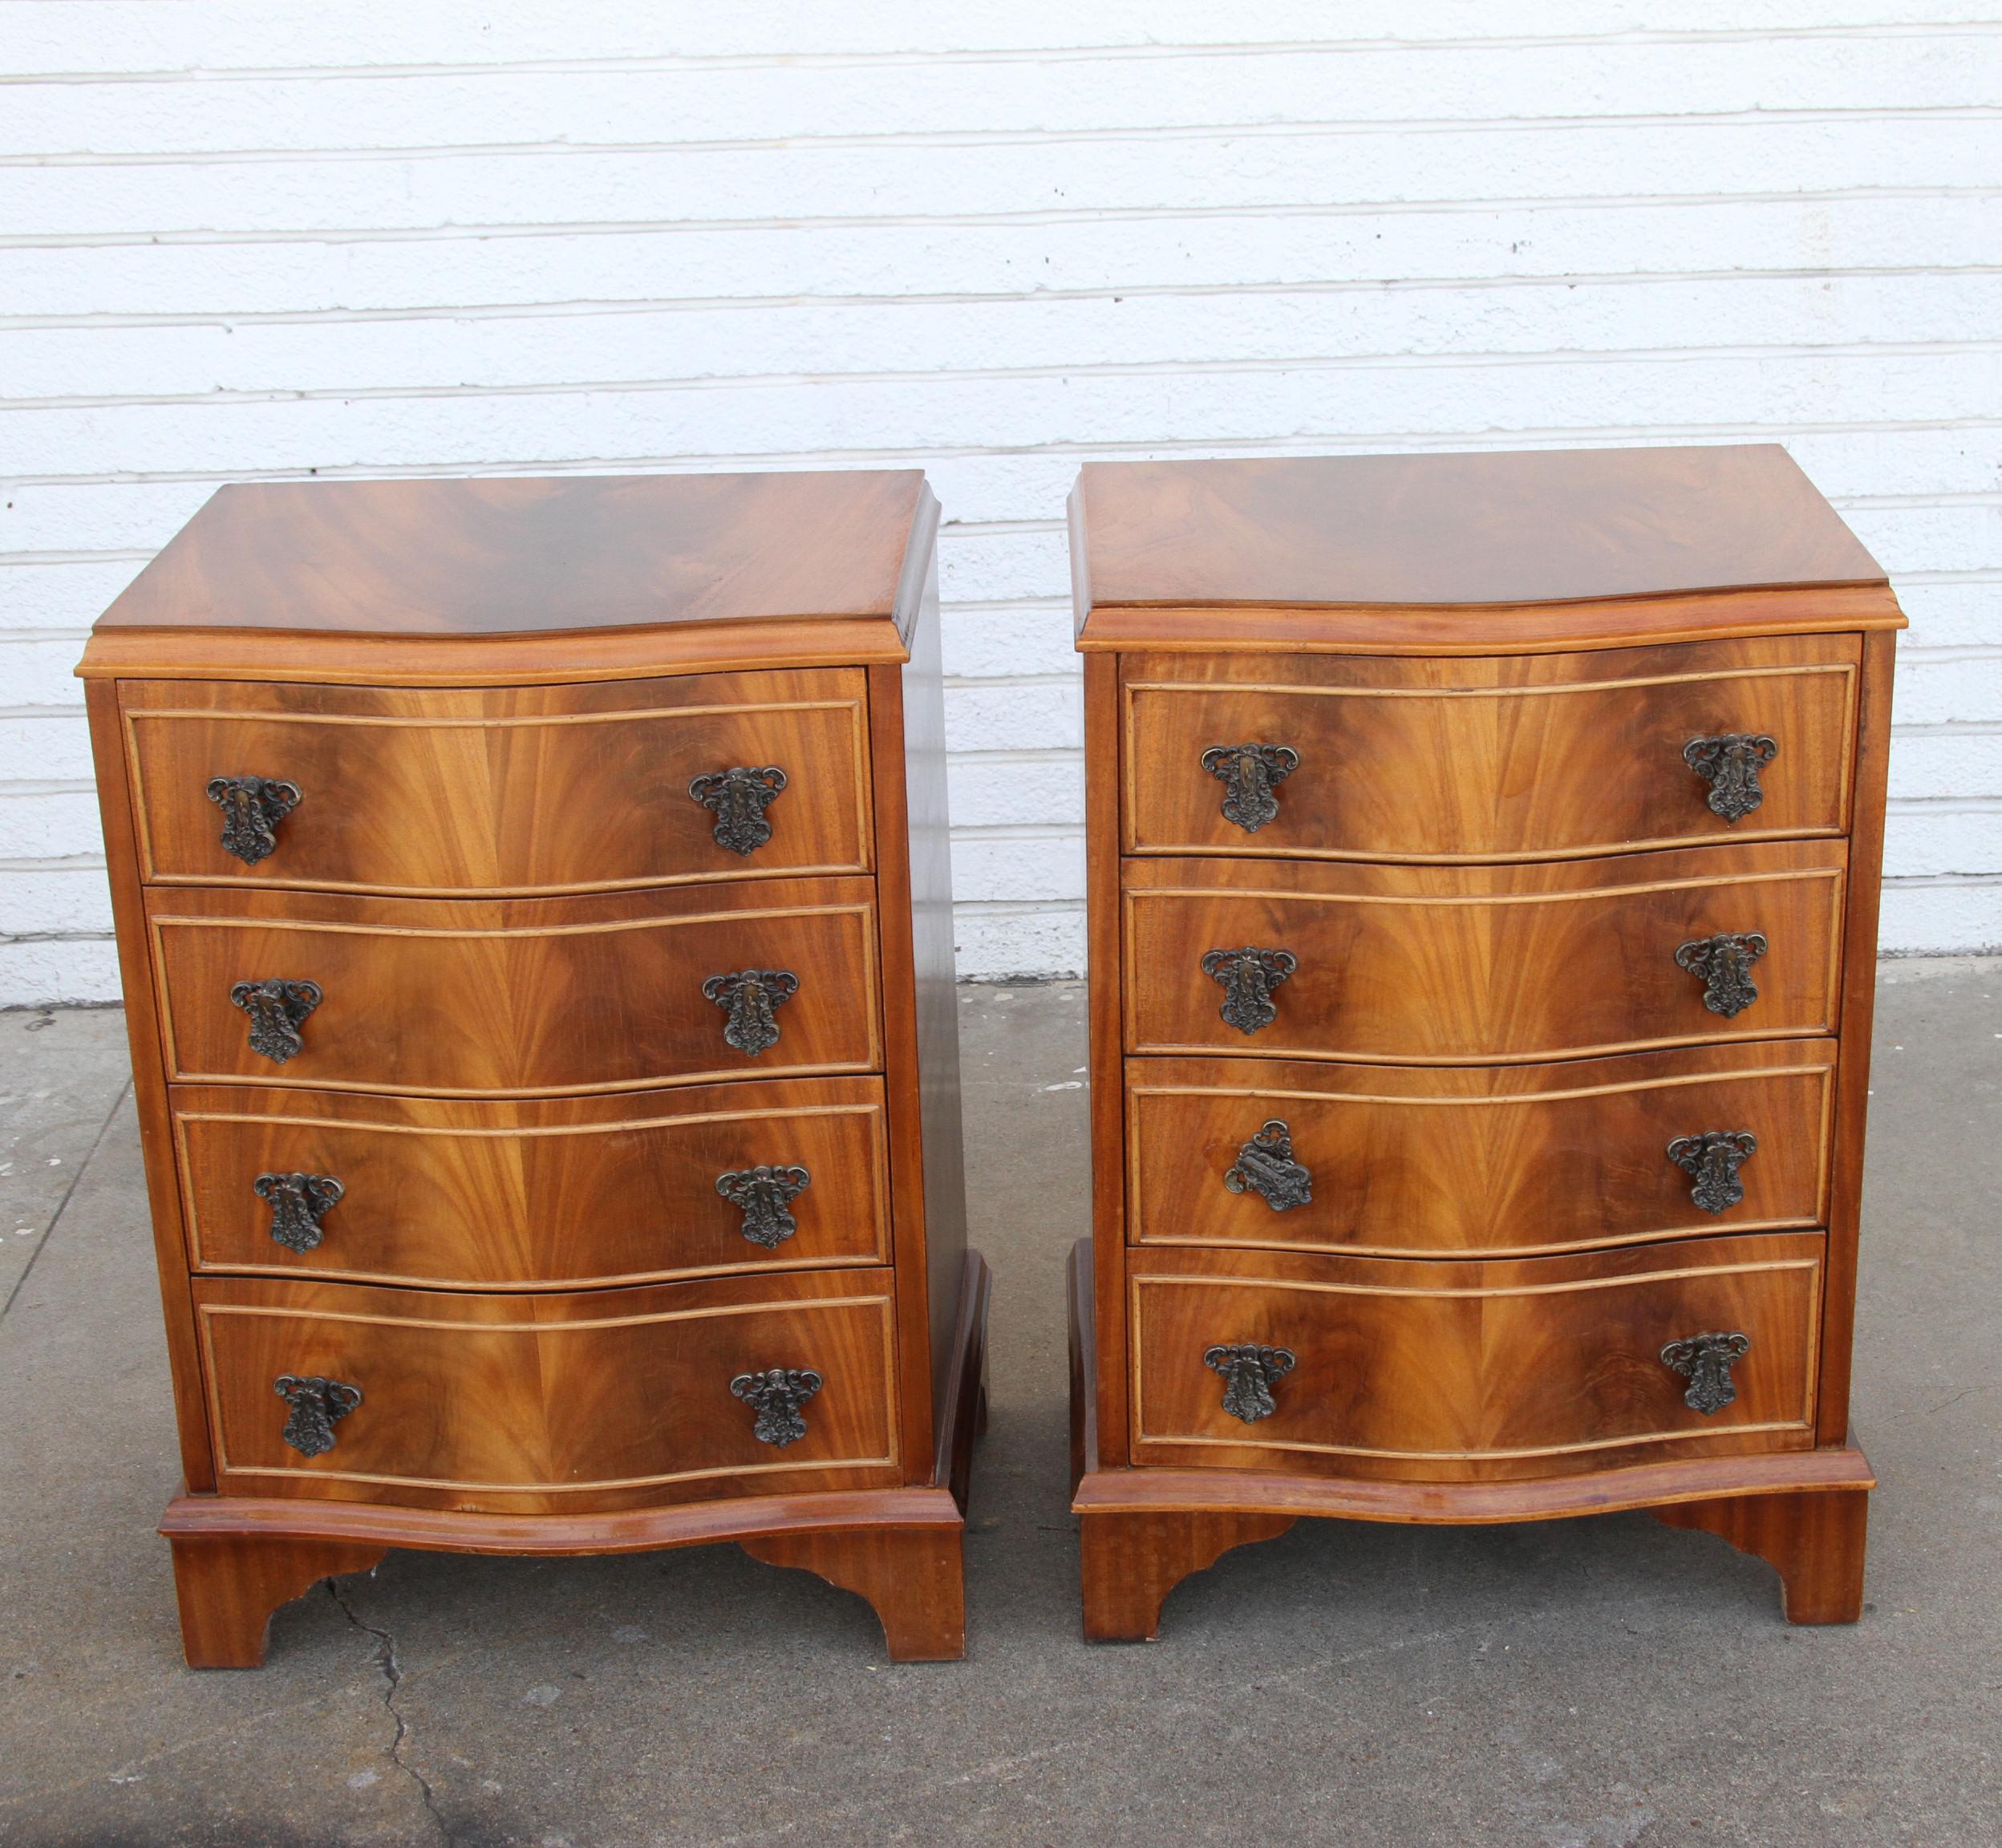 Pair English Chippendale Style Nightstands or Lamp Tables

Four drawer nightstands in a burr walnut.
Bow front with beautiful grain. Ornate bronze pulls.



